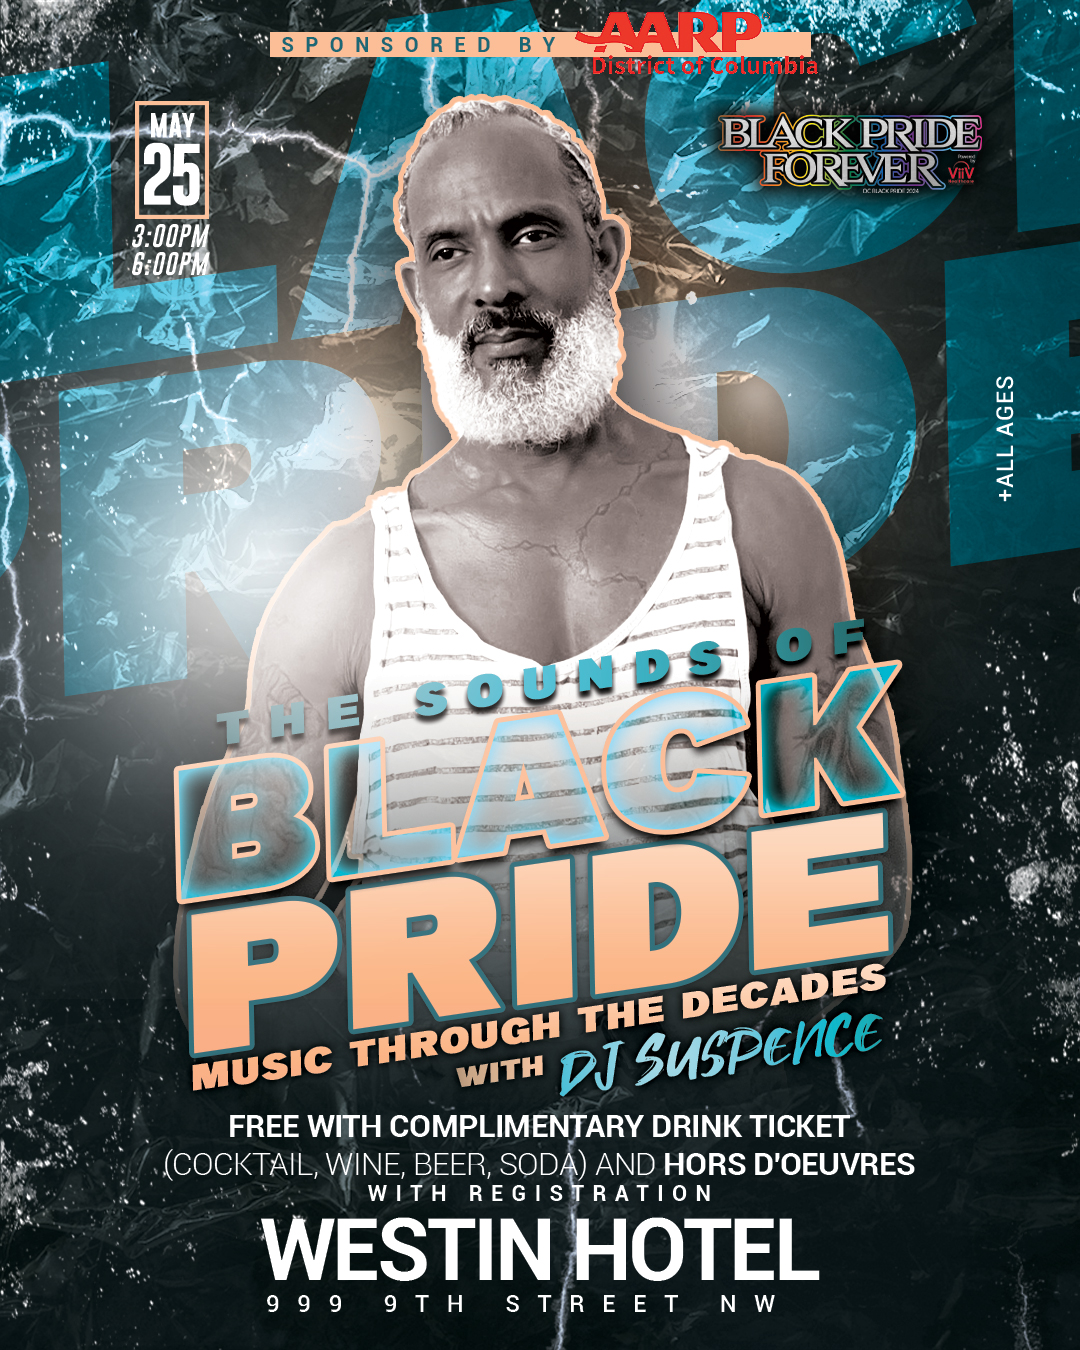 The Sounds of Black Pride: Music Through the Decades with DJ Suspence